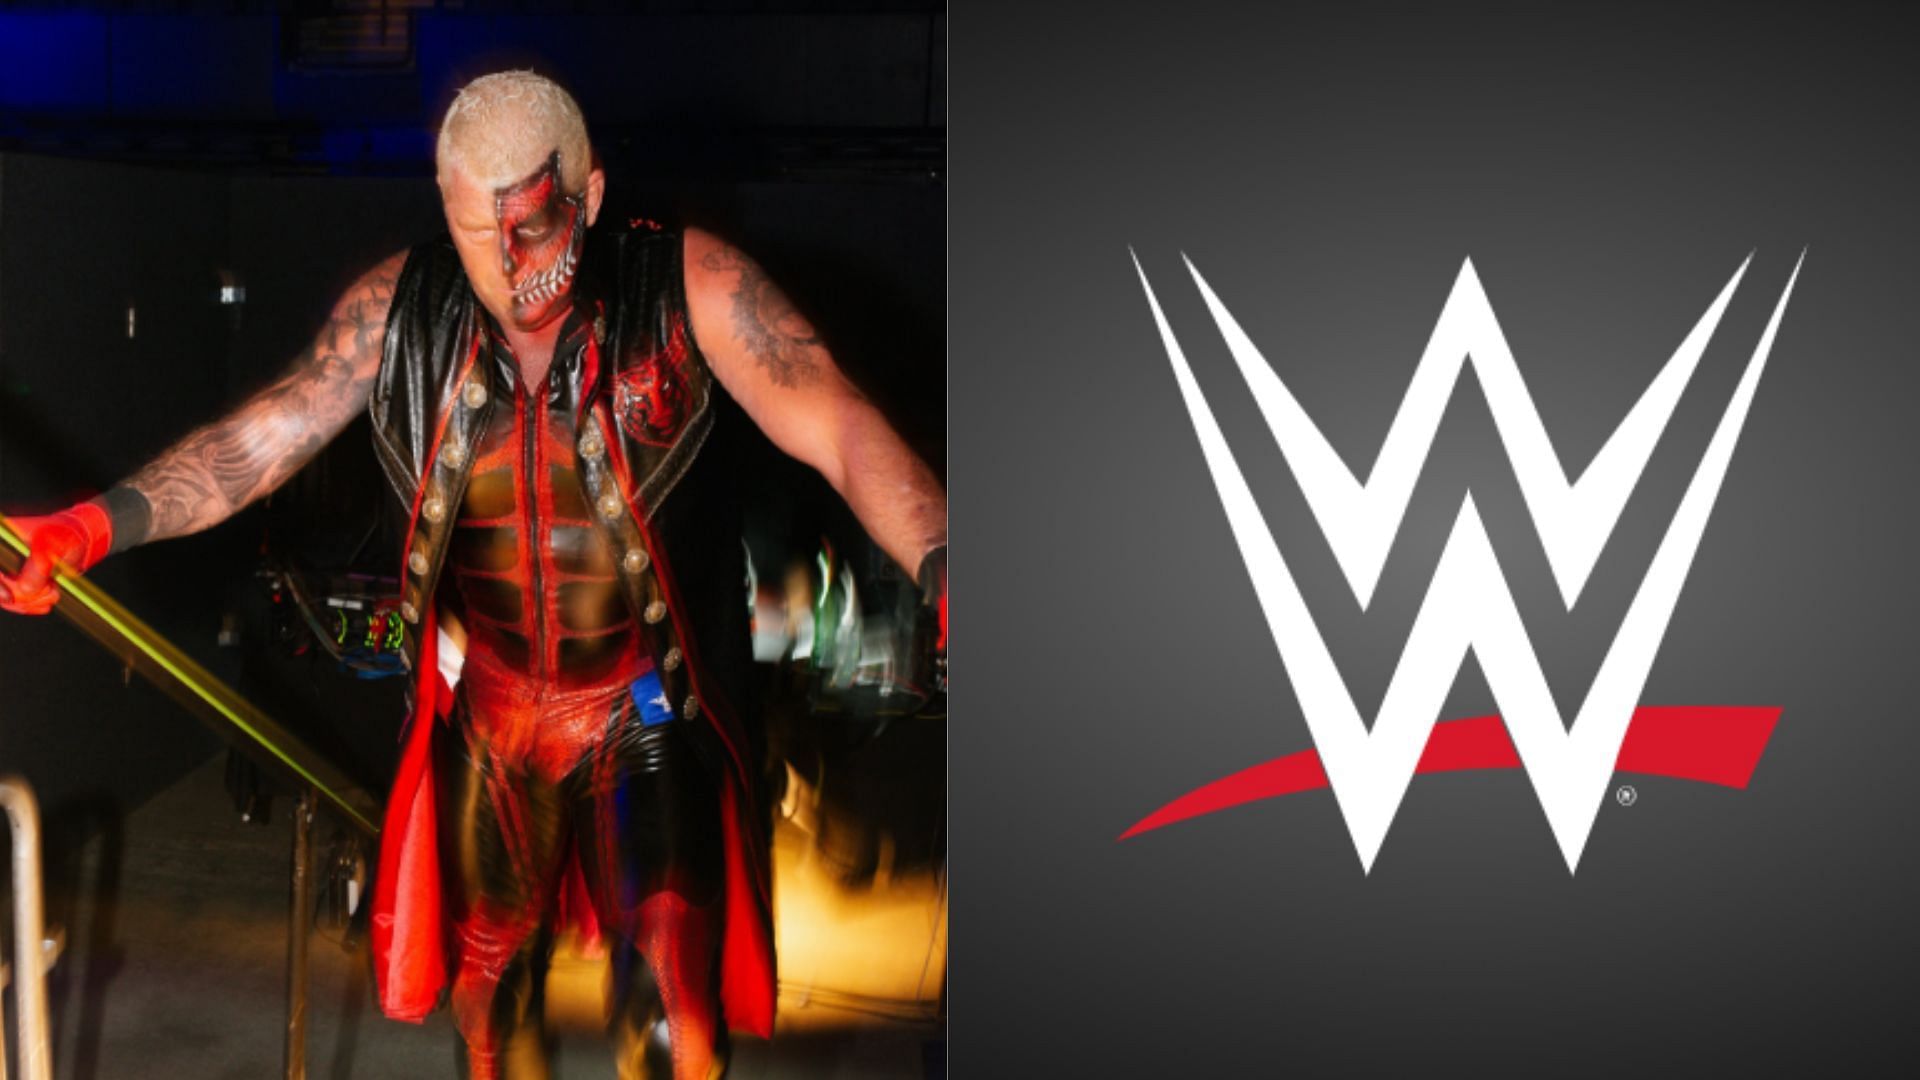 Dustin Rhodes is currently signed with AEW [Image Credits: Dustin